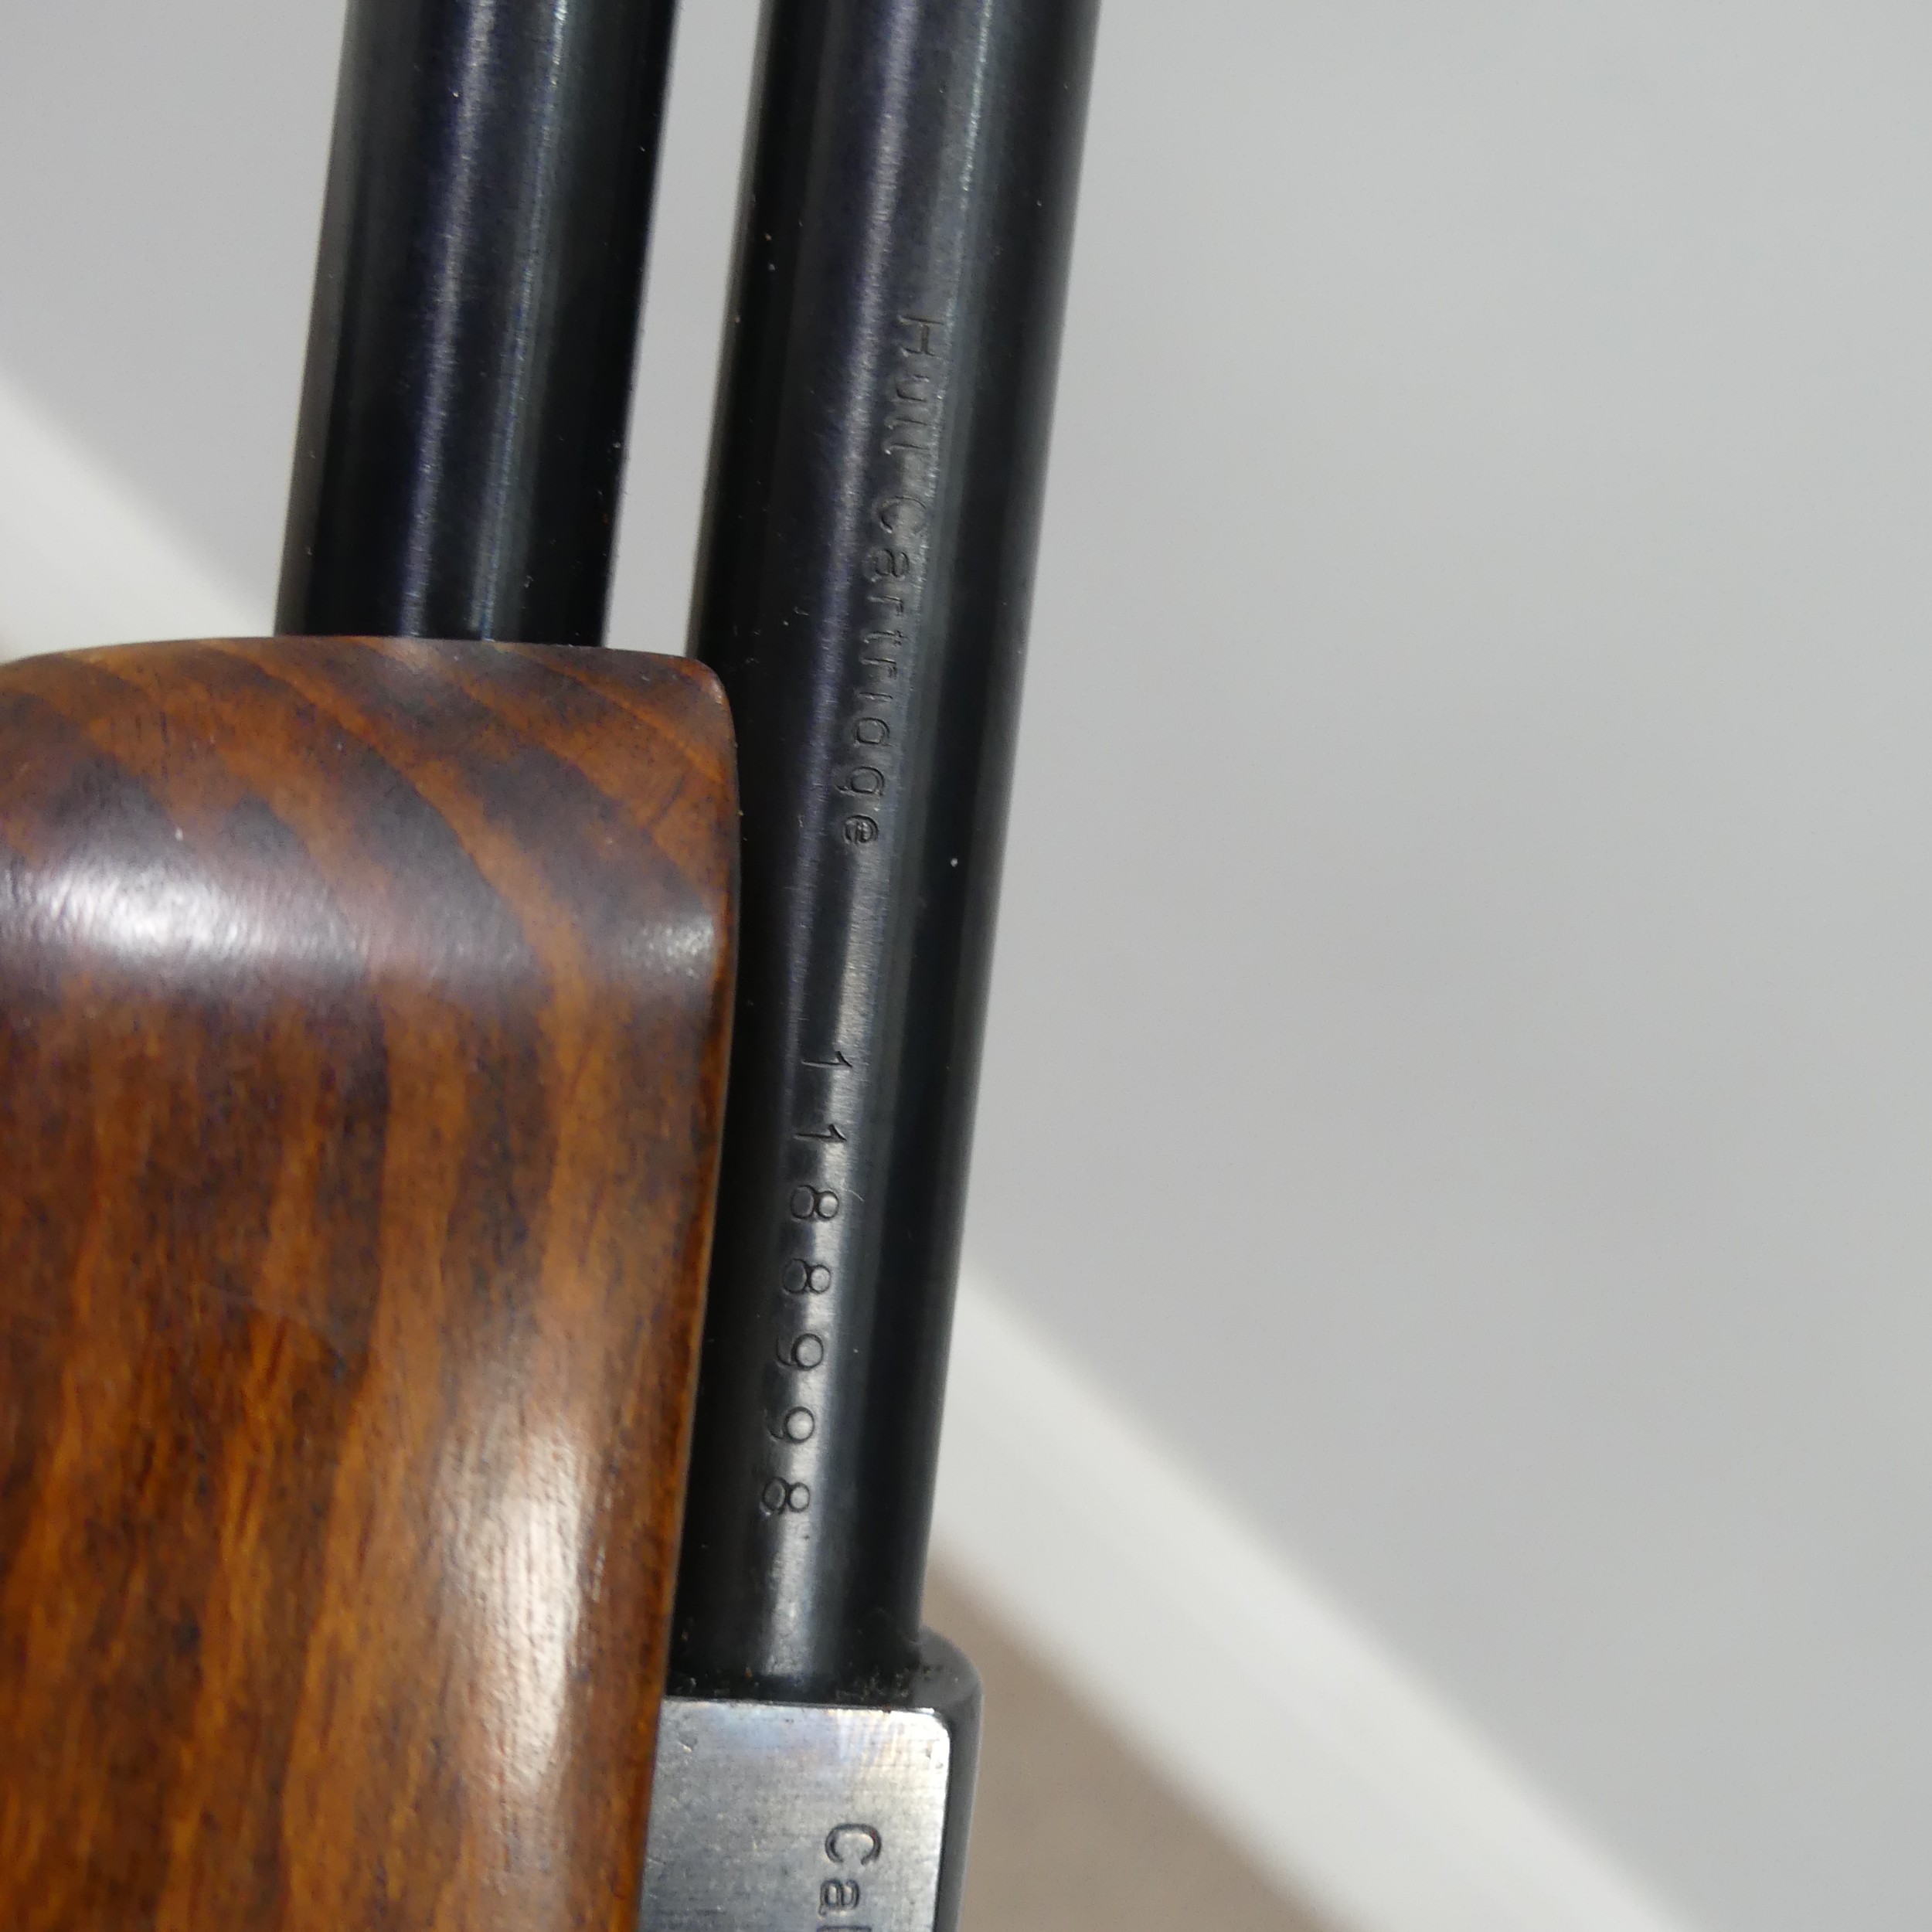 Weihrauch model HW 77 K .22 Air Rifle, with under lever action, beech stock with chequered pistol - Image 3 of 5